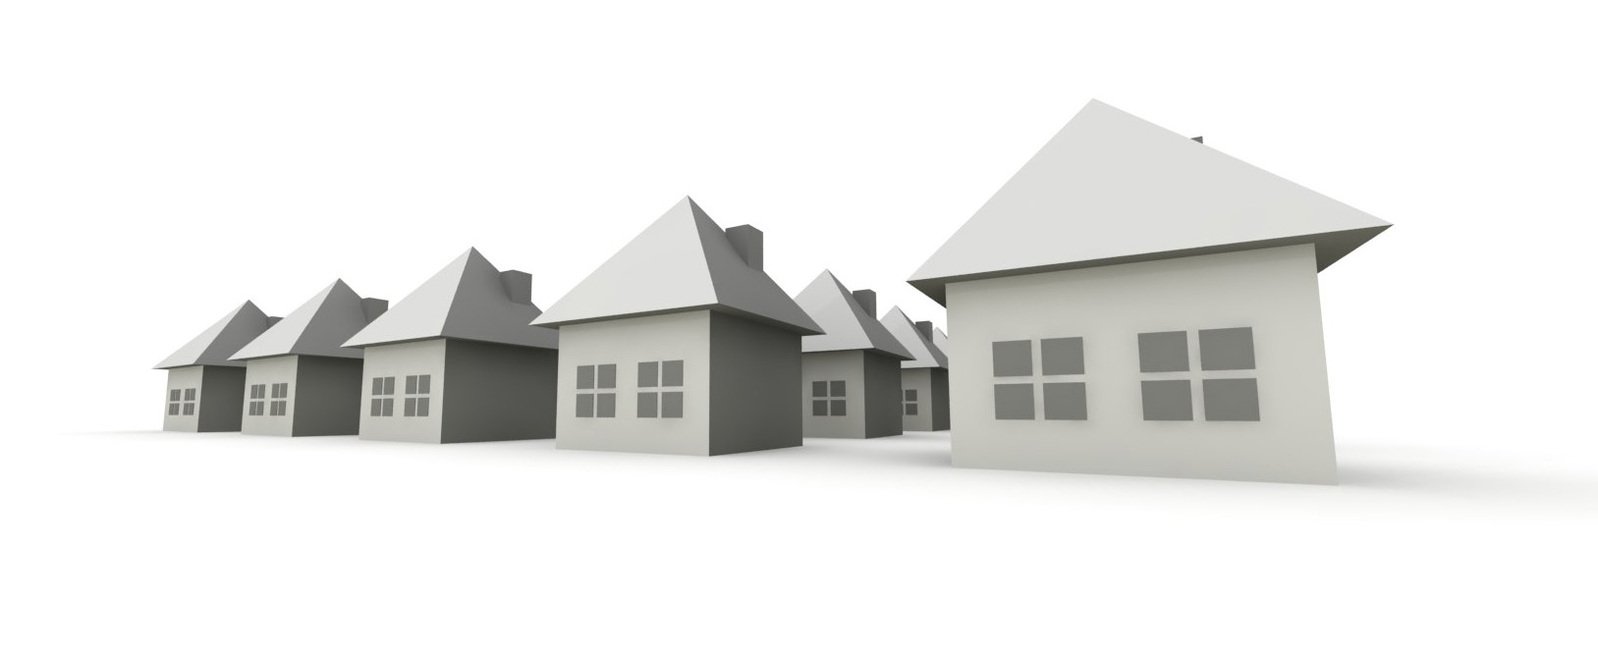 an image of some small houses that are in the snow